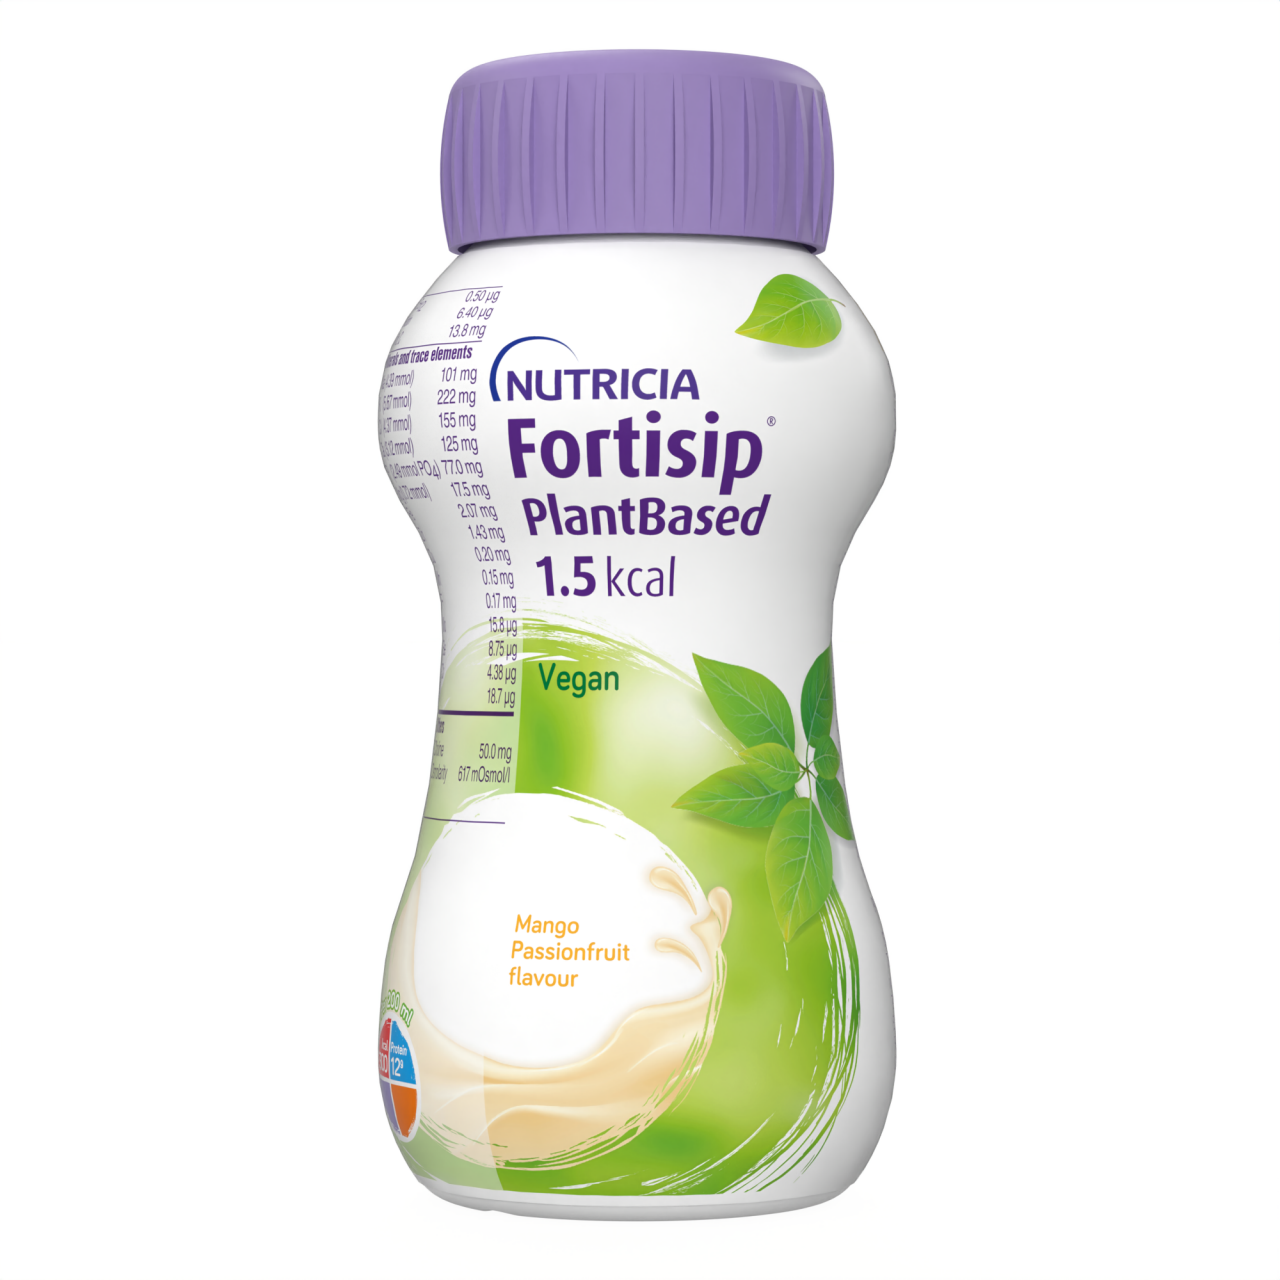 Fortisip PlantBased 1.5kcal Mango, Passion fruit flavour